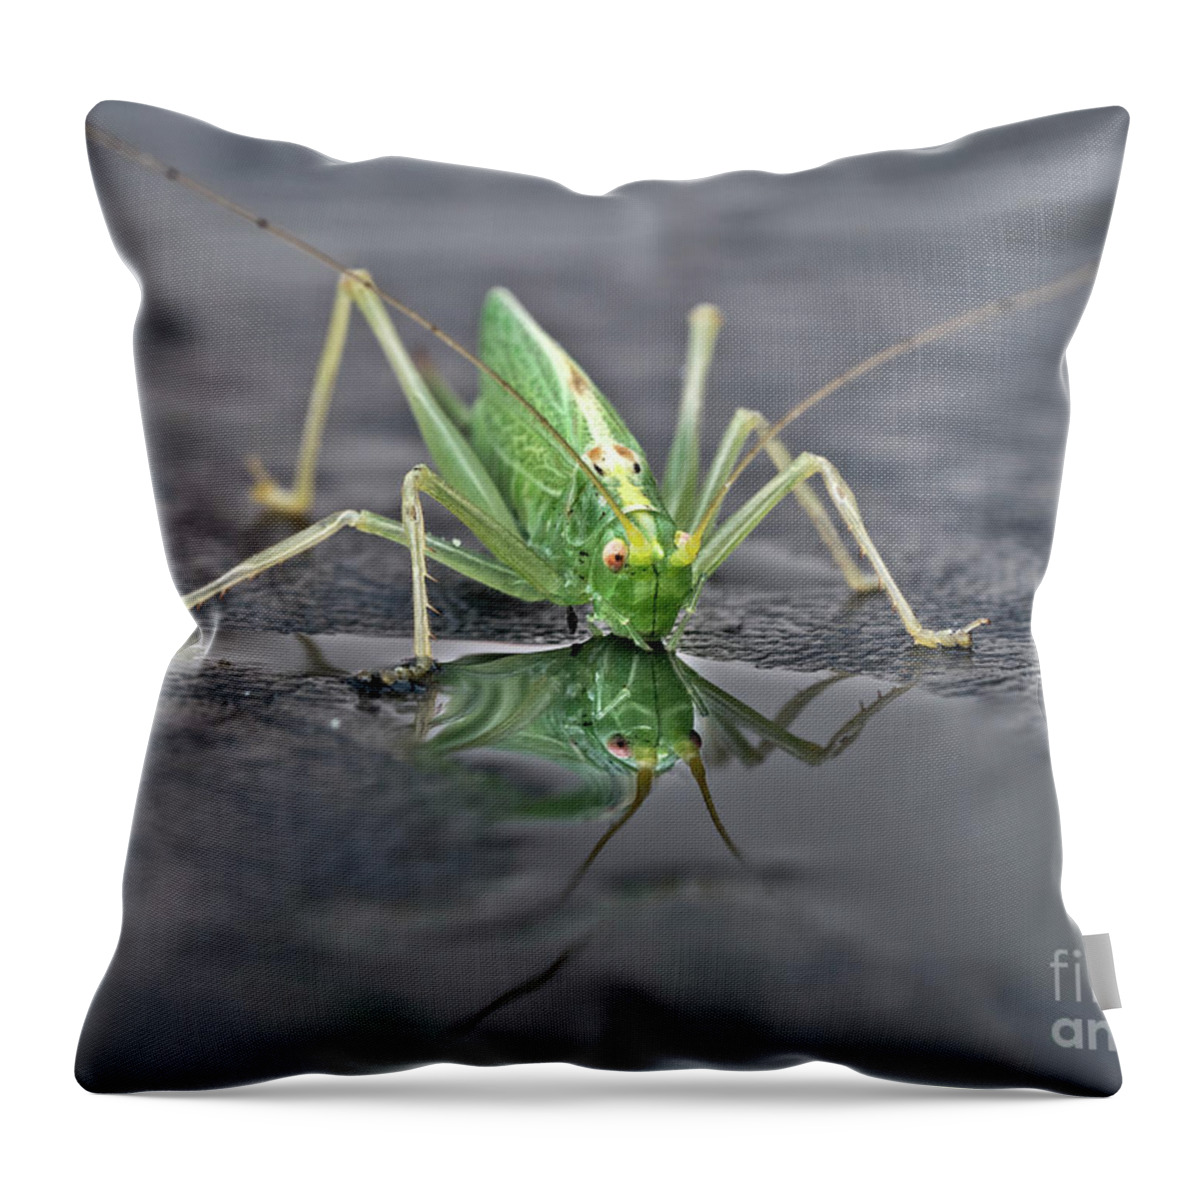 Sip Mirror Reflection Beautiful Green Eyes Cricket Drinking Water Insect Six Legs Unique Bizarre Close Up Macro Natural History Looking Humor Funny Single One Life-style Portrait Whiskers Delicate Vivid Color Beauty Alone Posing Elegant Handsome Figure Character Expressive Charming Singular Stylish Solo Fantastic Solitary Lonesome Loner Pretty Delightful Serenity Enjoying Joy Stimulating Mysterious Surreal Creative Fantasy Weird Imaginary Aesthetic Eccentric Grotesque Peculiar Face Puddle Nice Throw Pillow featuring the photograph Sip Of Water - Am I Beautiful? by Tatiana Bogracheva